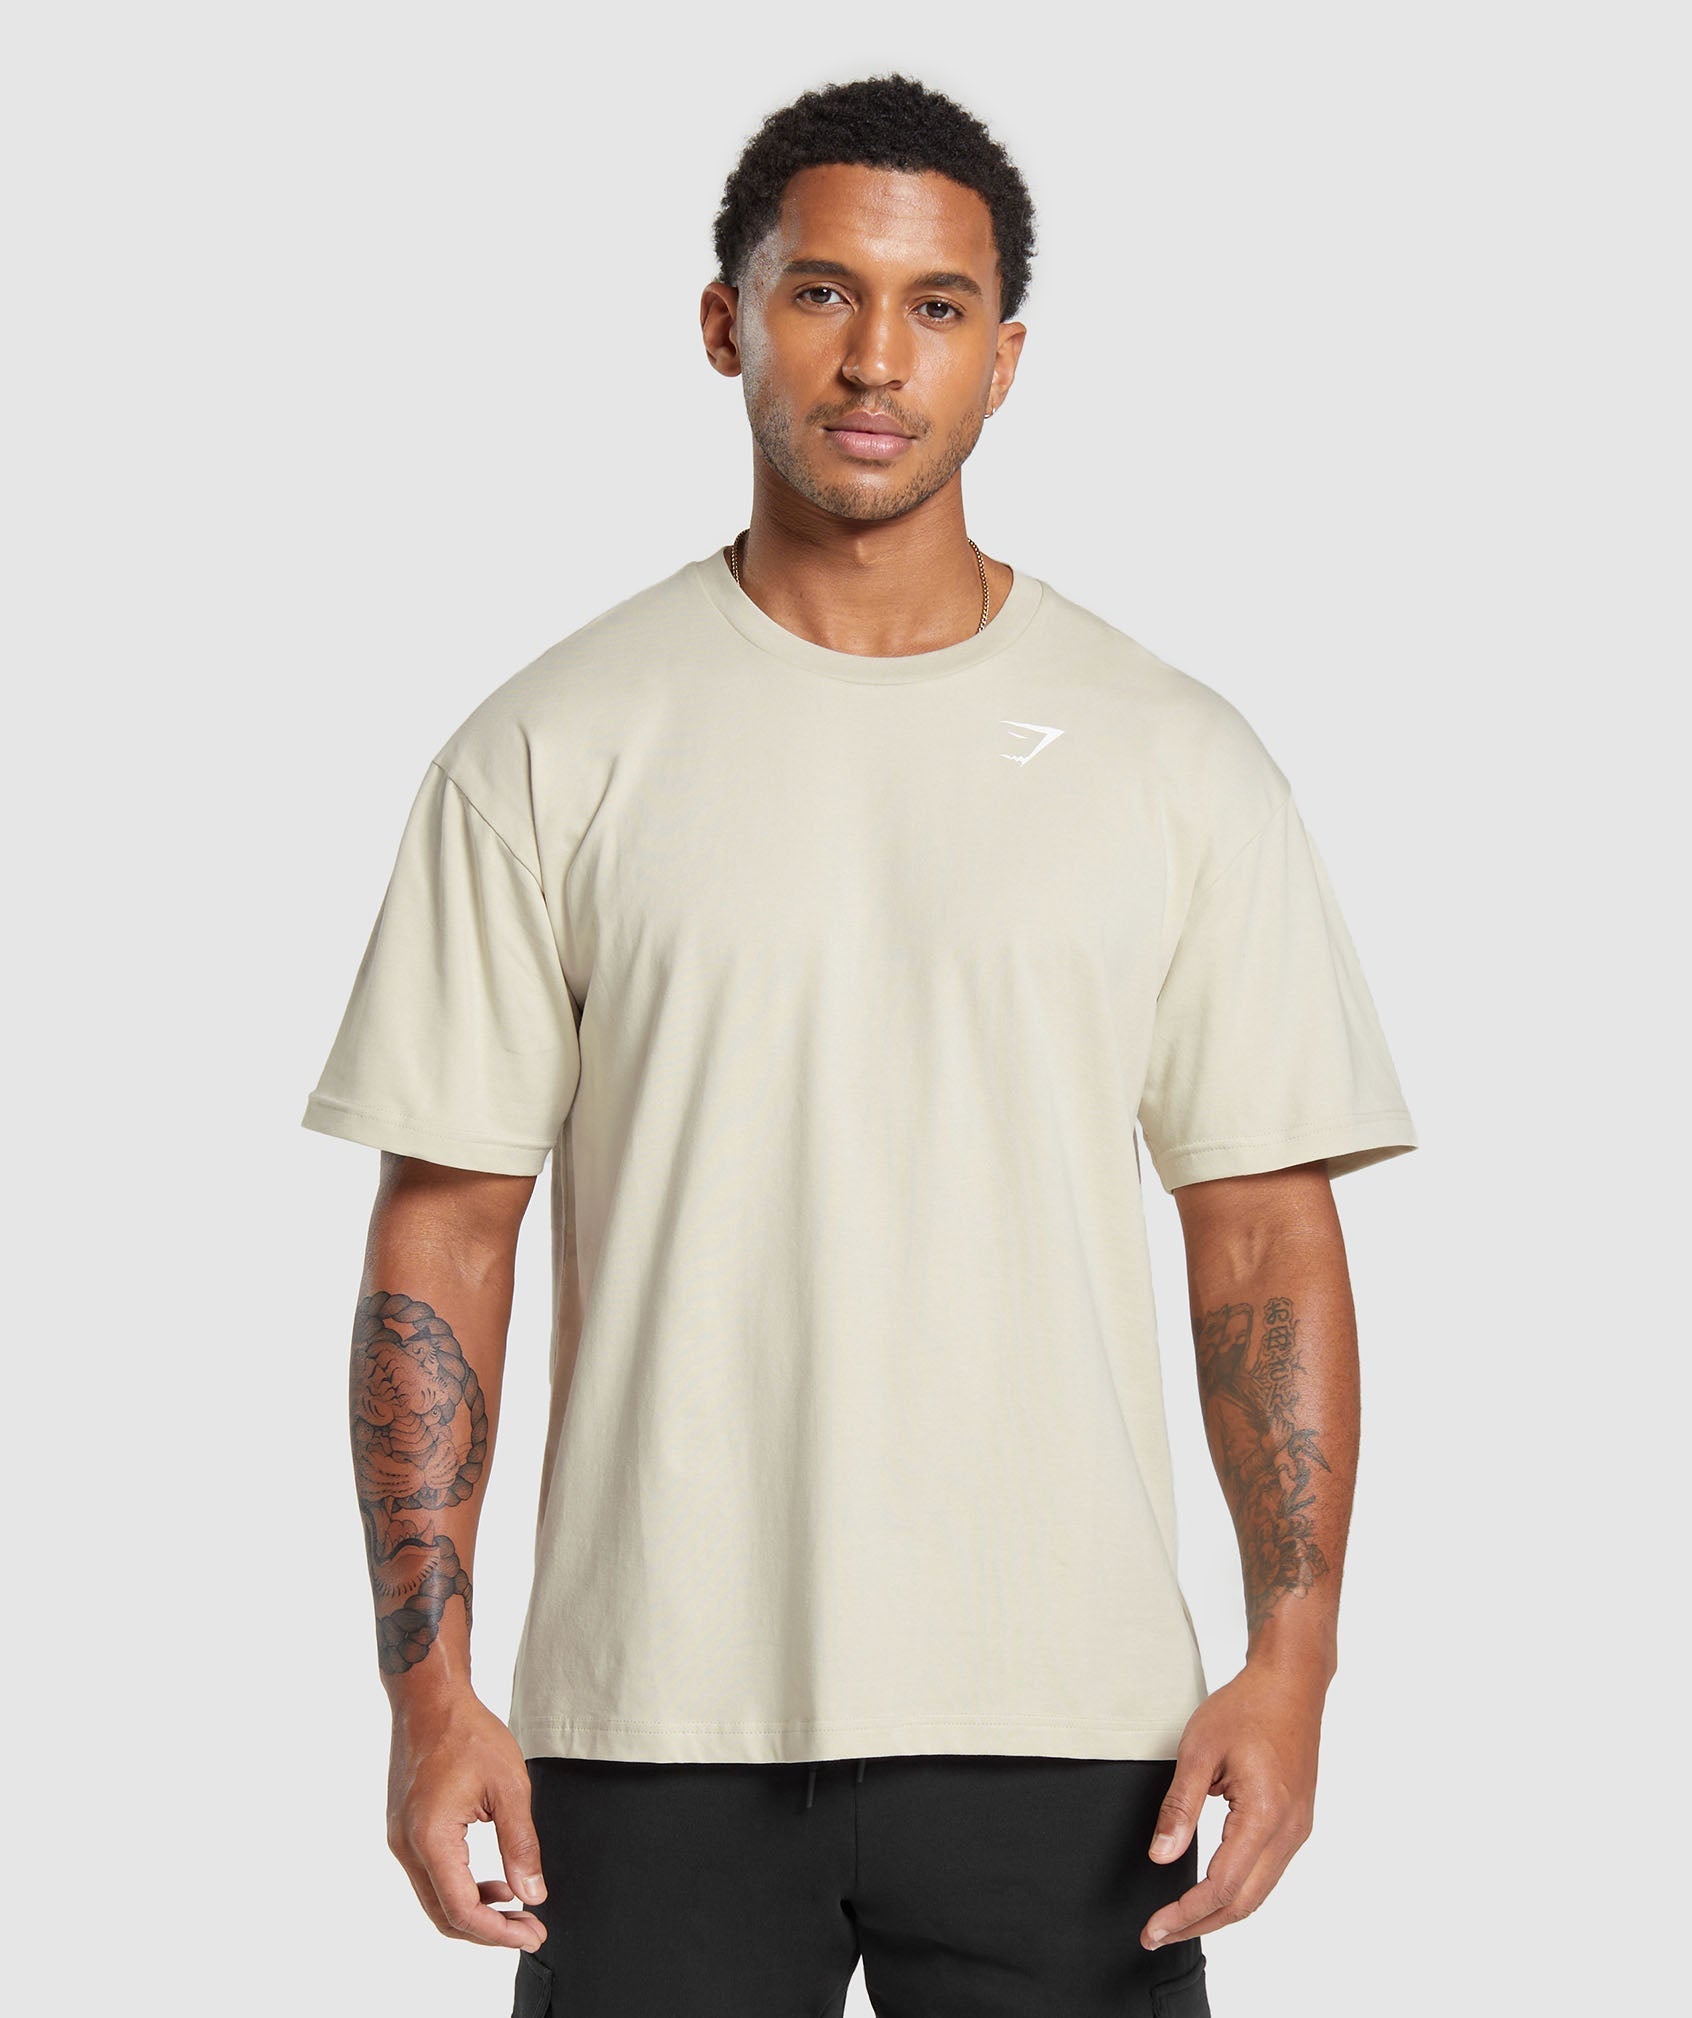 Essential Oversized T-Shirt in Pebble Grey